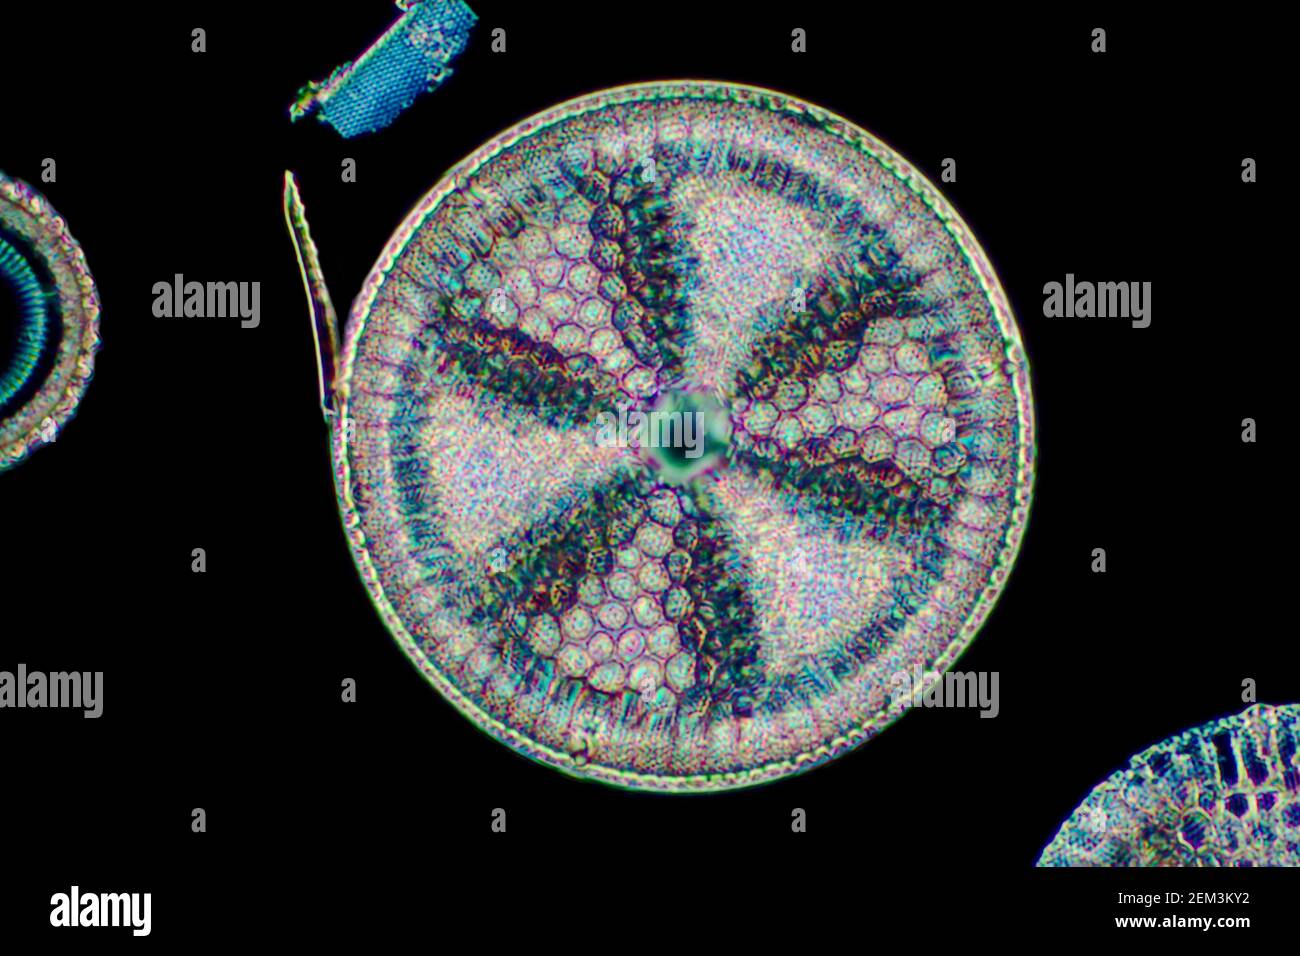 diatom (Diatomeae), diatom from Dunkirk in Maryland, dark field microscopic image, magnification x140 related to 35mm, USA, Maryland Stock Photo